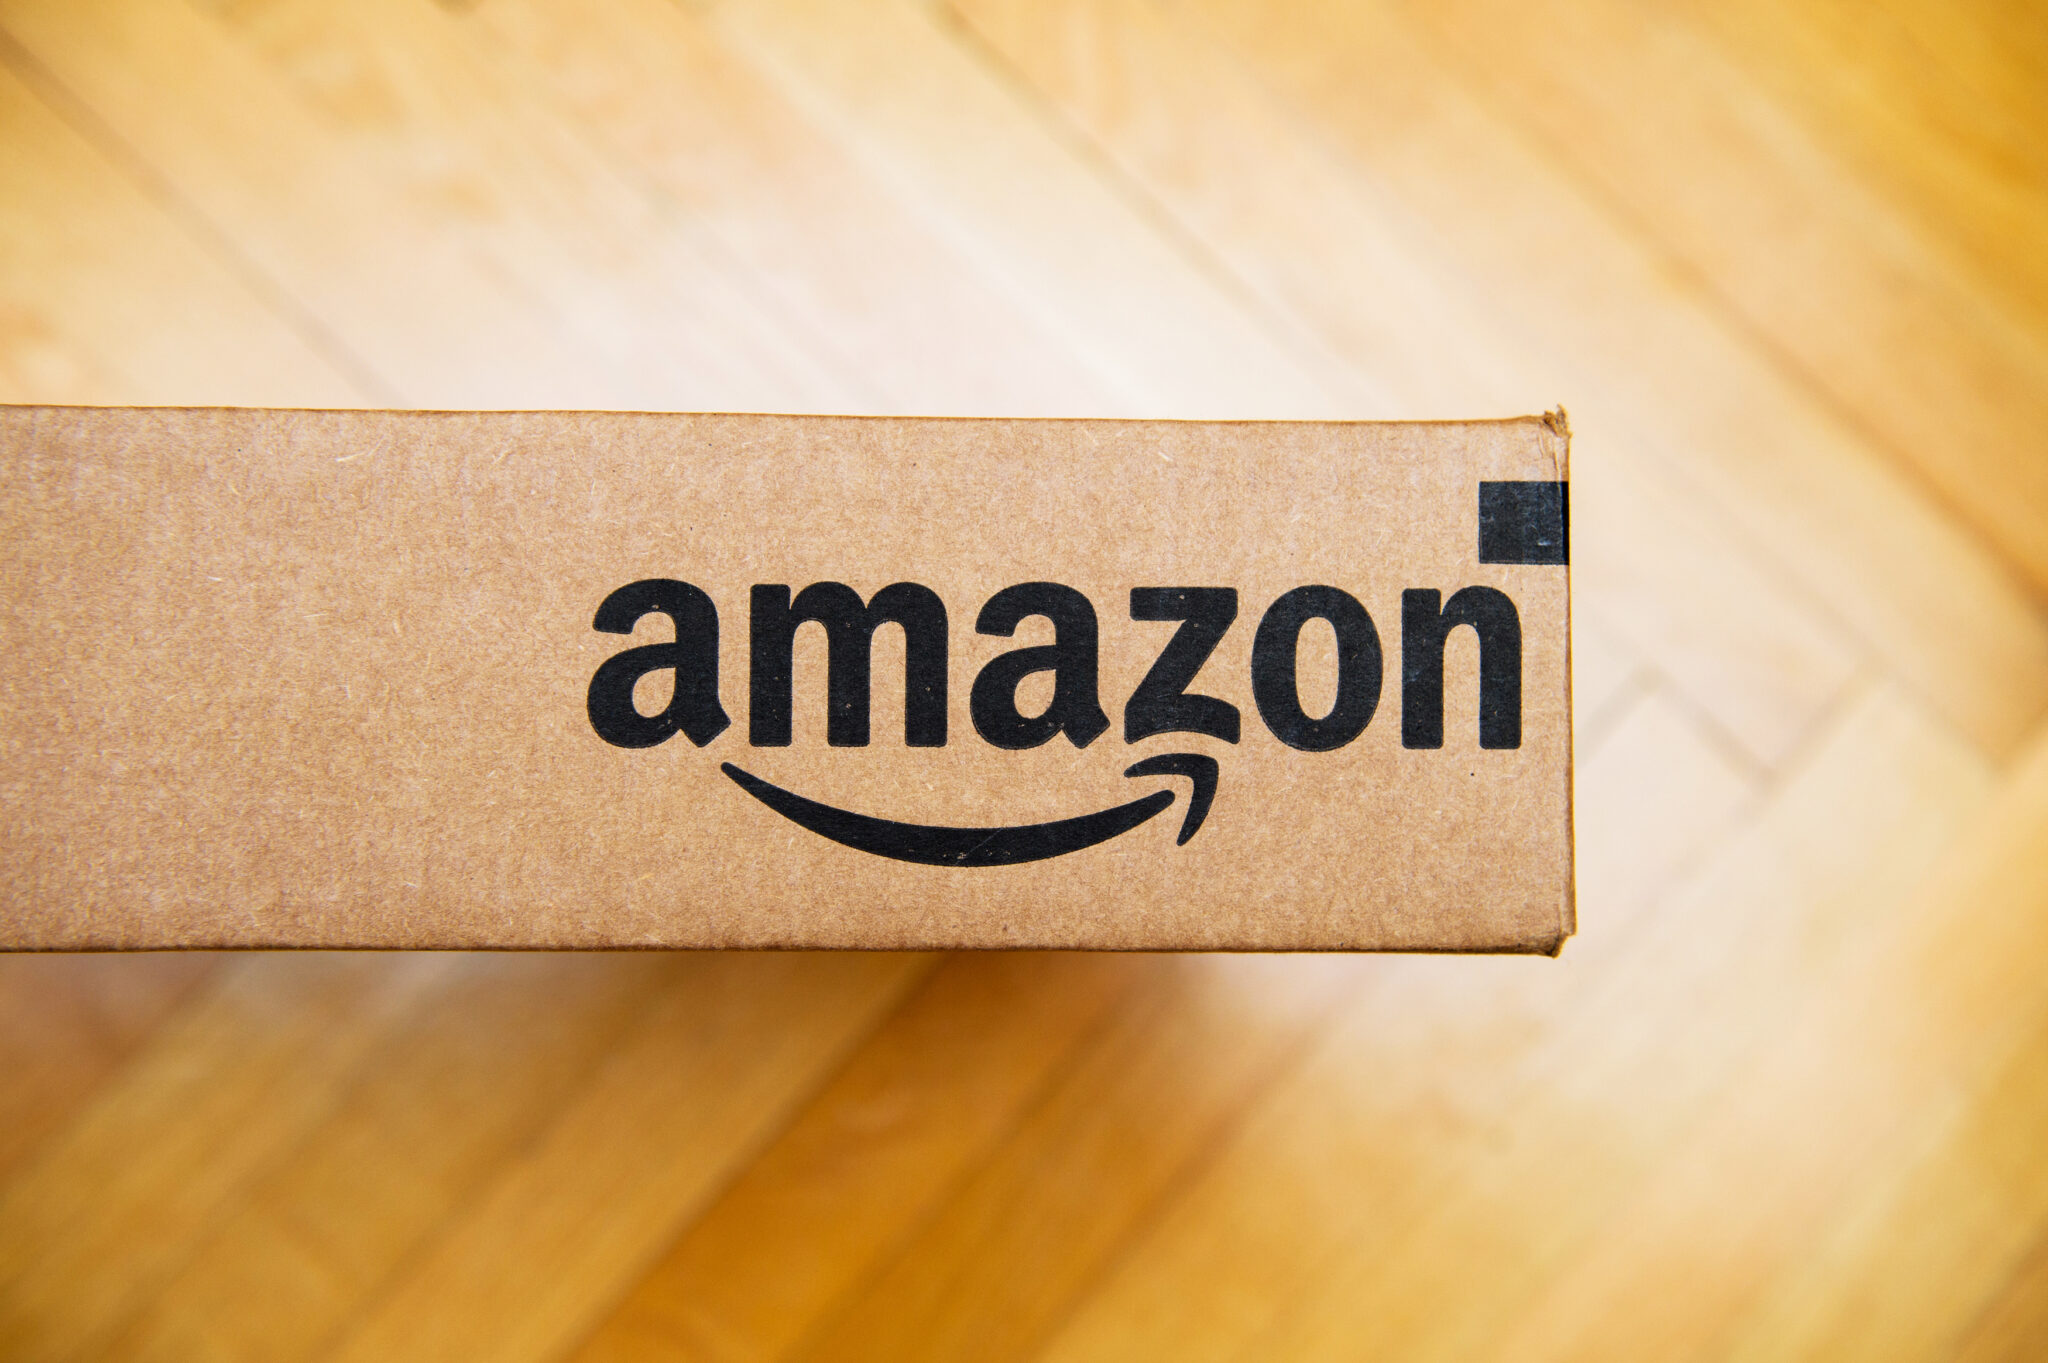 Amazon and others contest NLRB's internal procedures (Credits: Than Finances)